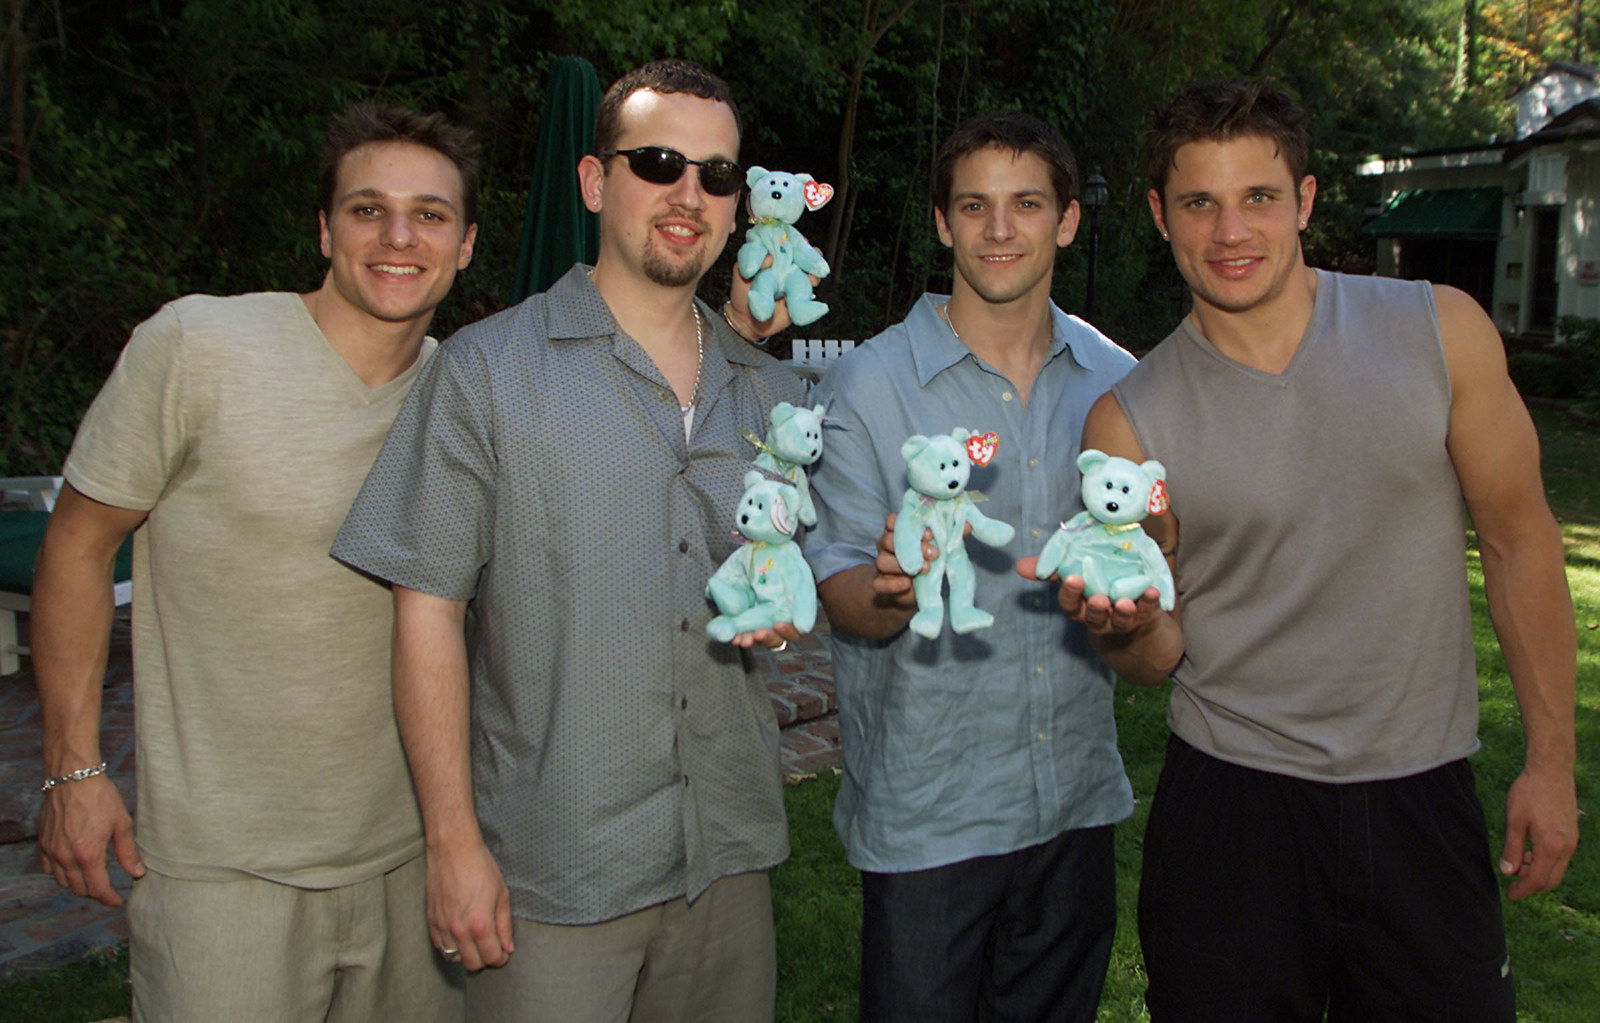 Nick Lachey, Jeff Timmons, Drew Lachey, and Justin Jeffre outside and holding blue Beanie Babies